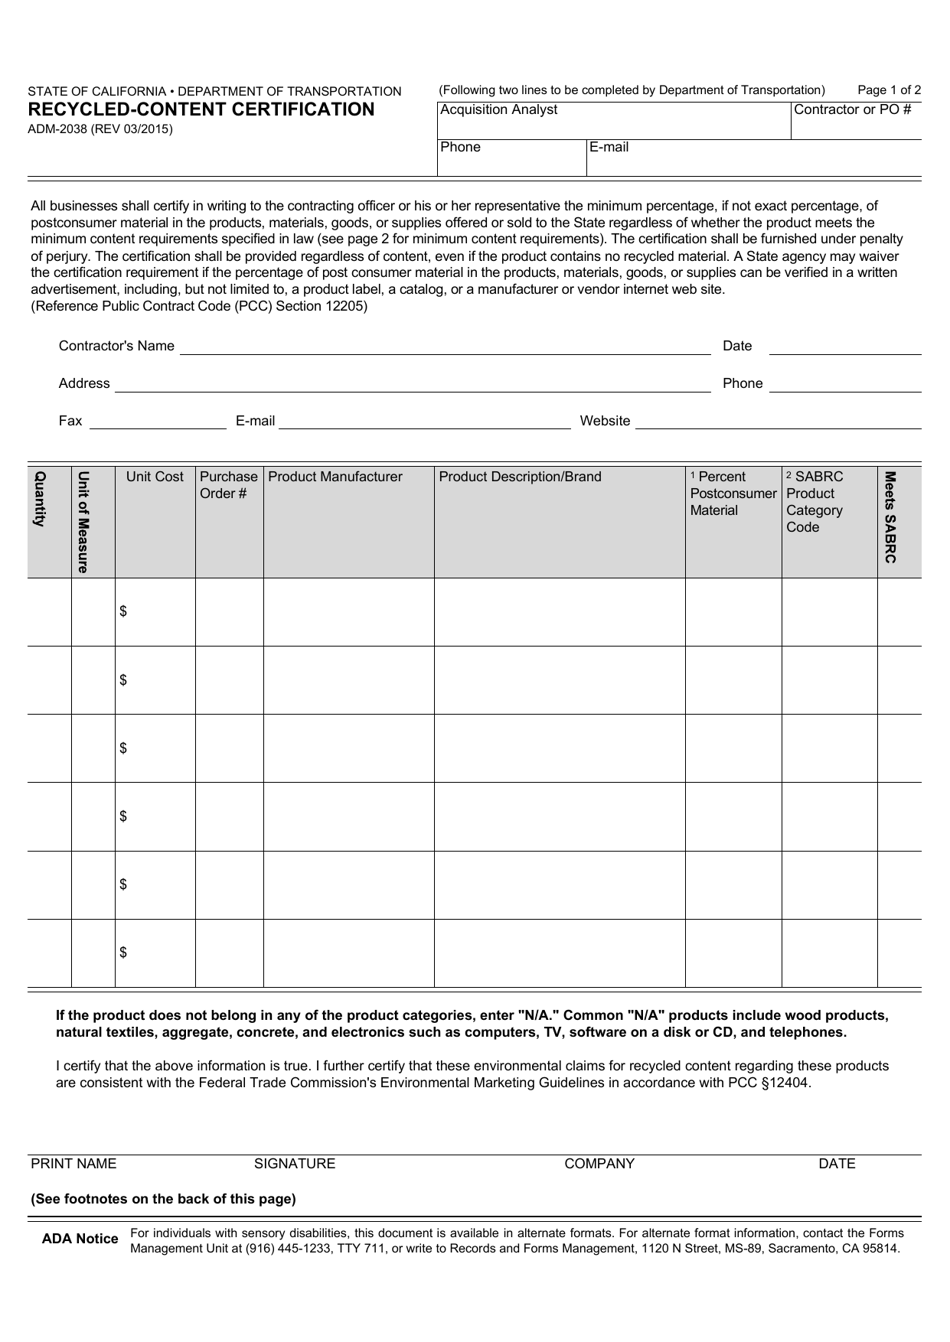 Form ADM-2038 Recycle Content Certification - California, Page 1